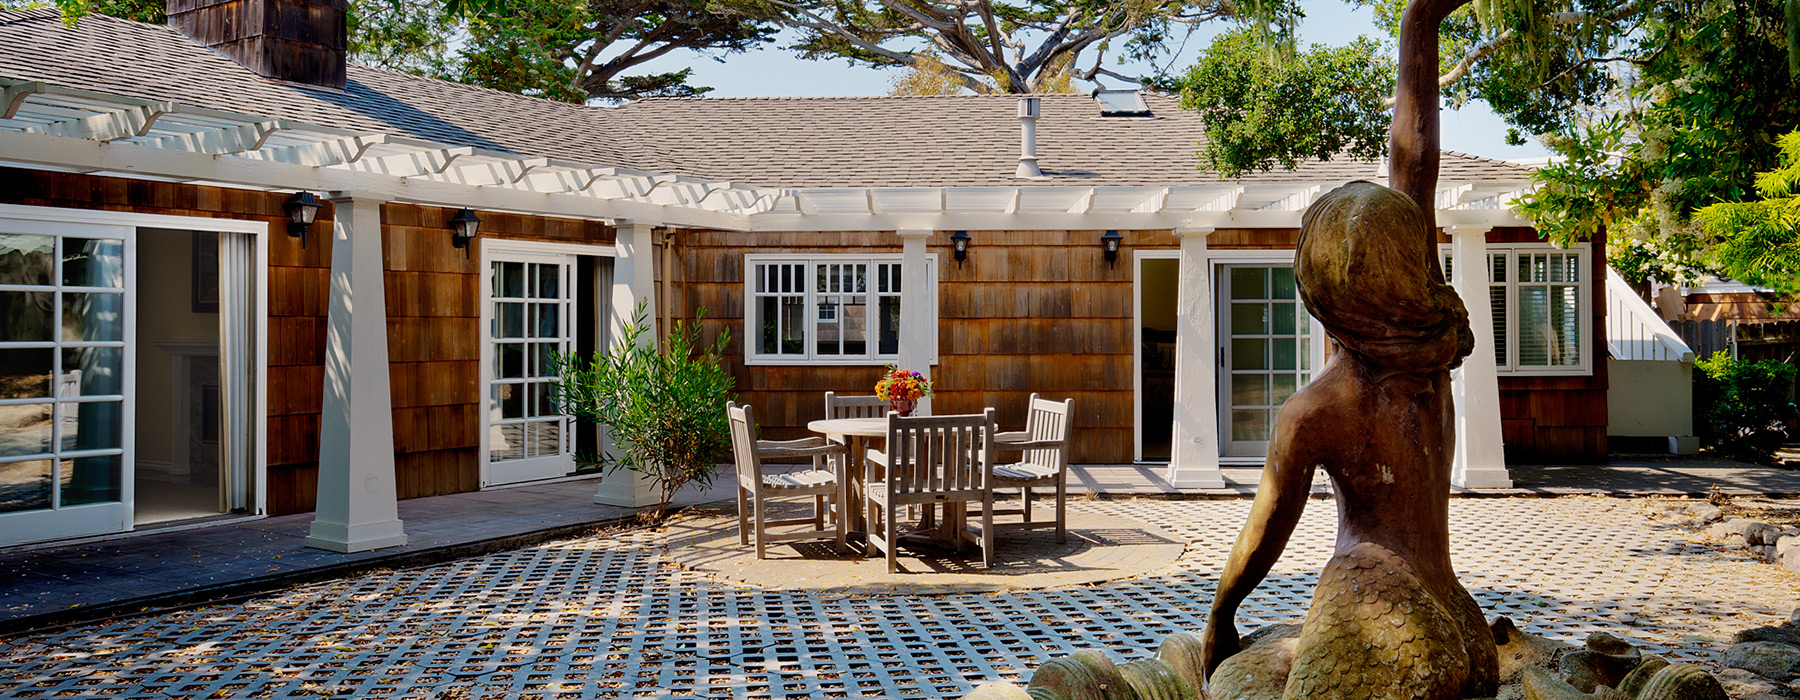 Email Offers & updates by Light House Lodge Cottages, California